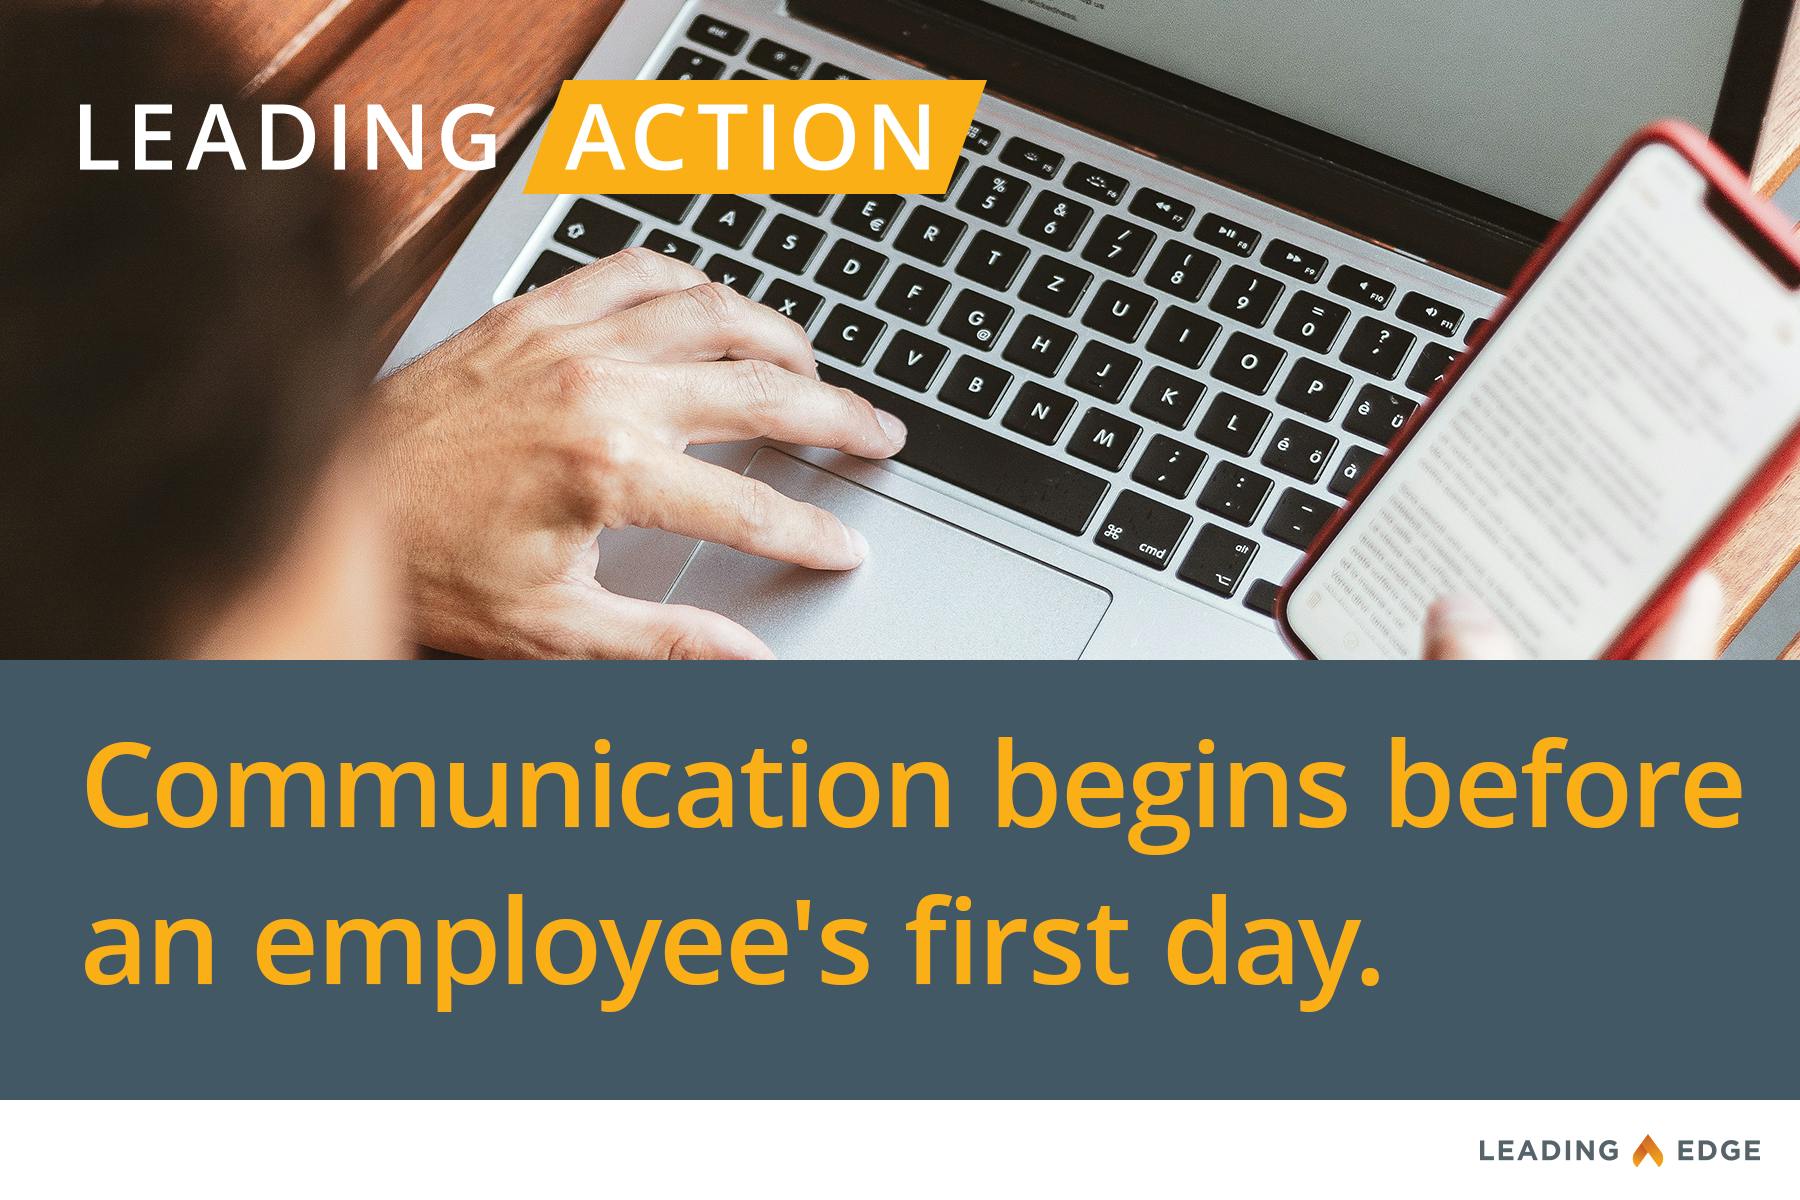 Leading Action: Communication begins before an employee's first day